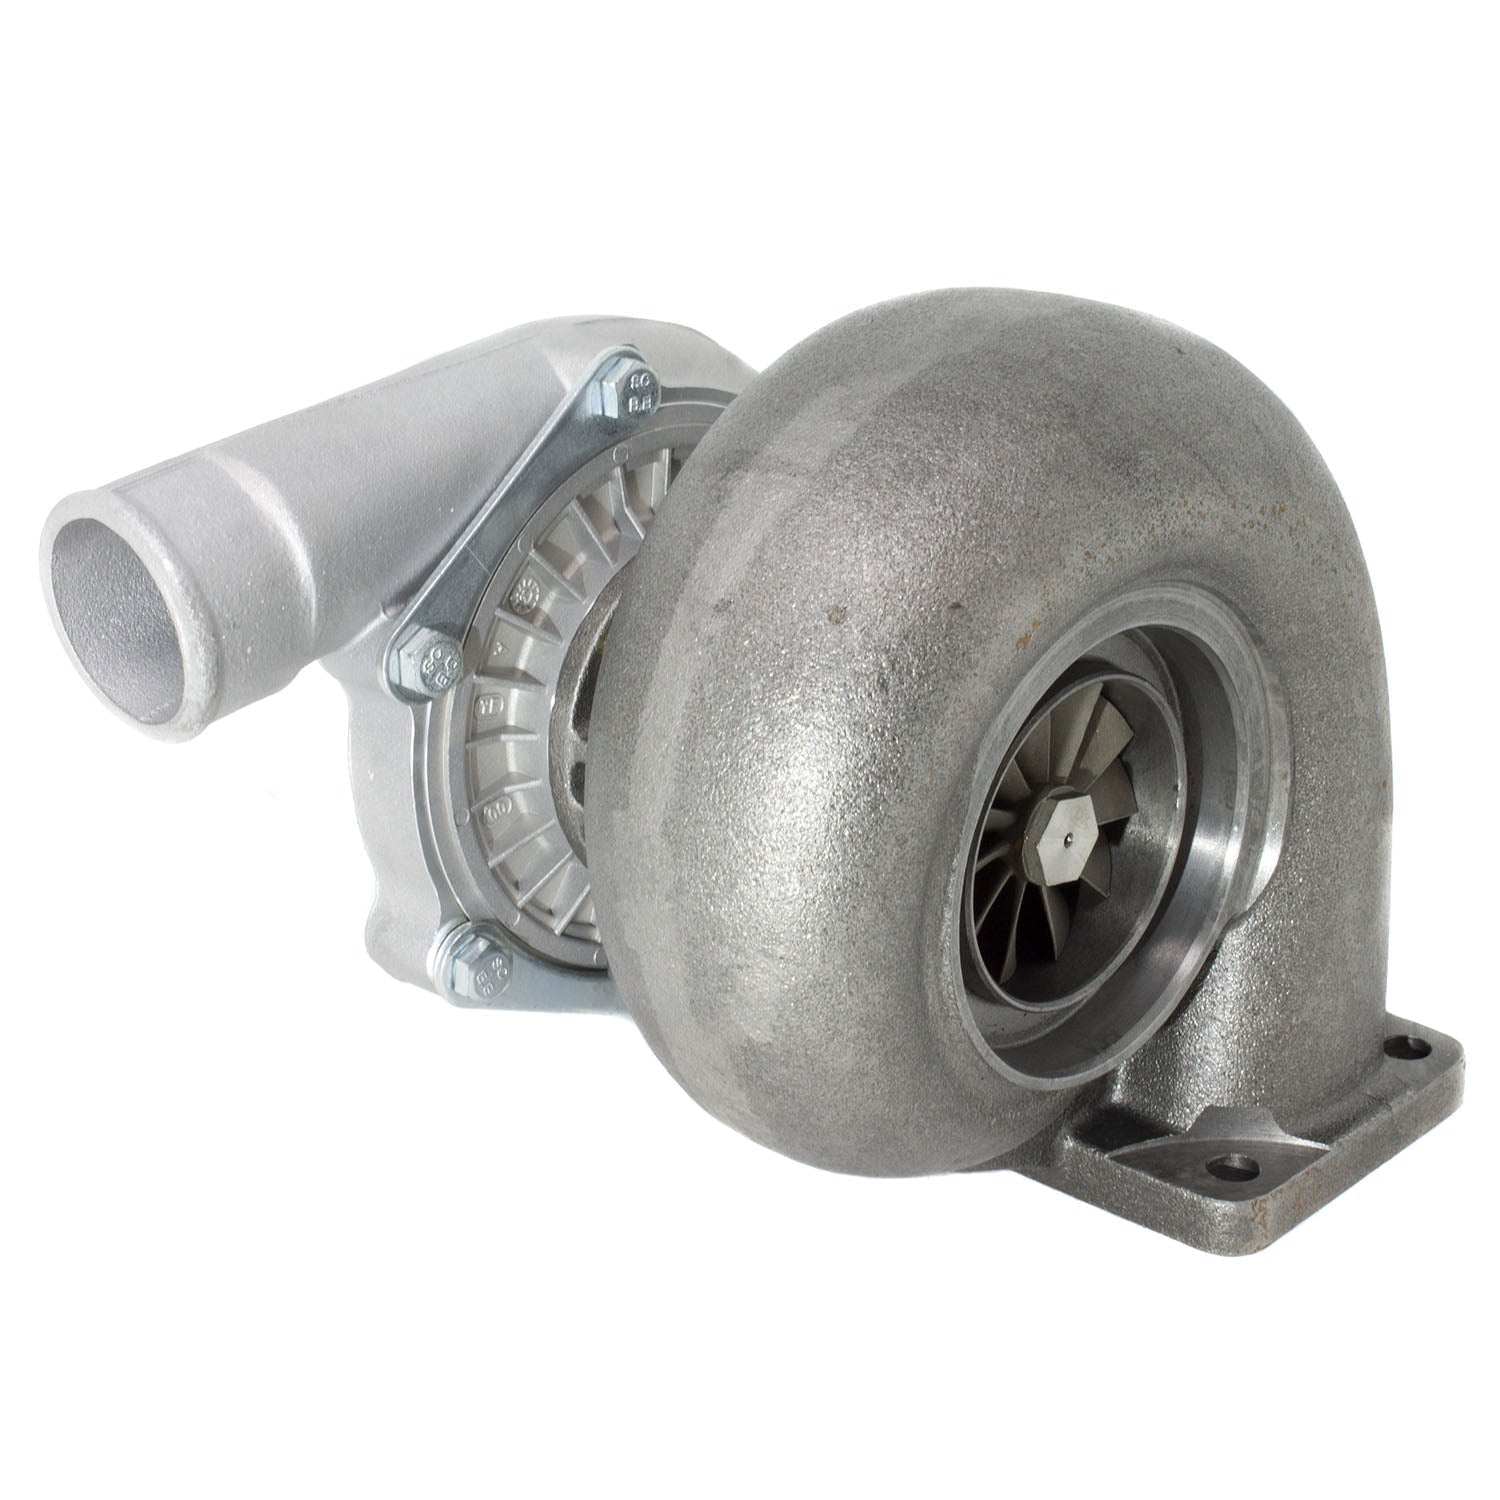 Duraforce A41956, Turbocharger For Case